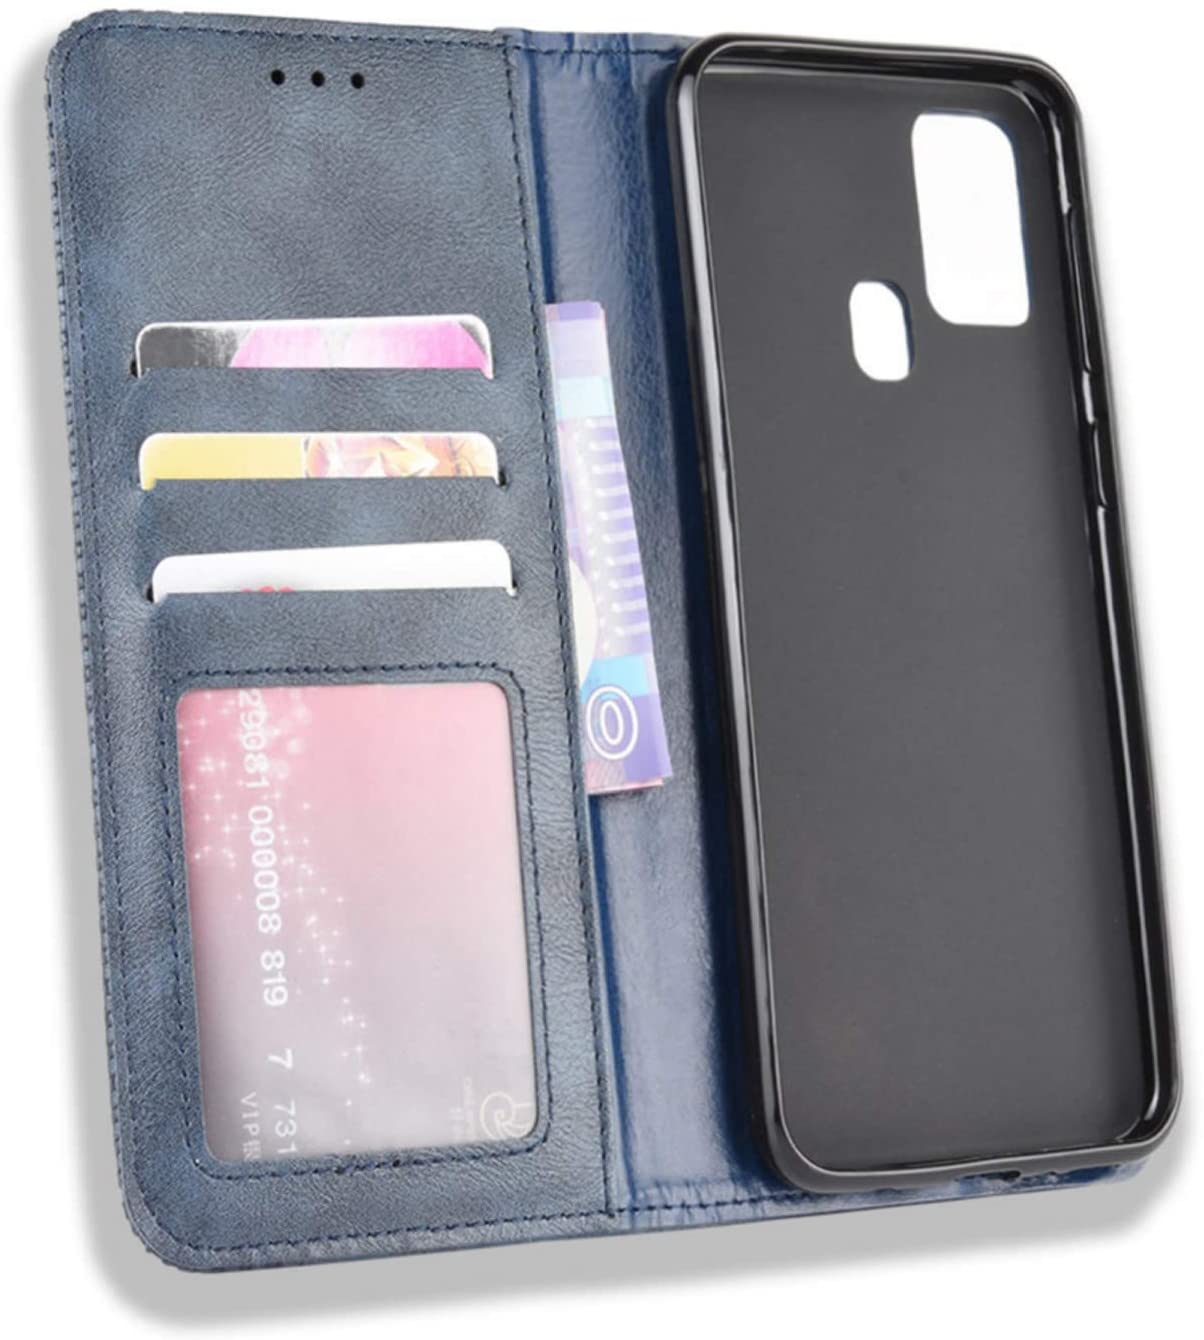 Samsung Galaxy M31 wallet flip cover case with soft tpu inner cover 